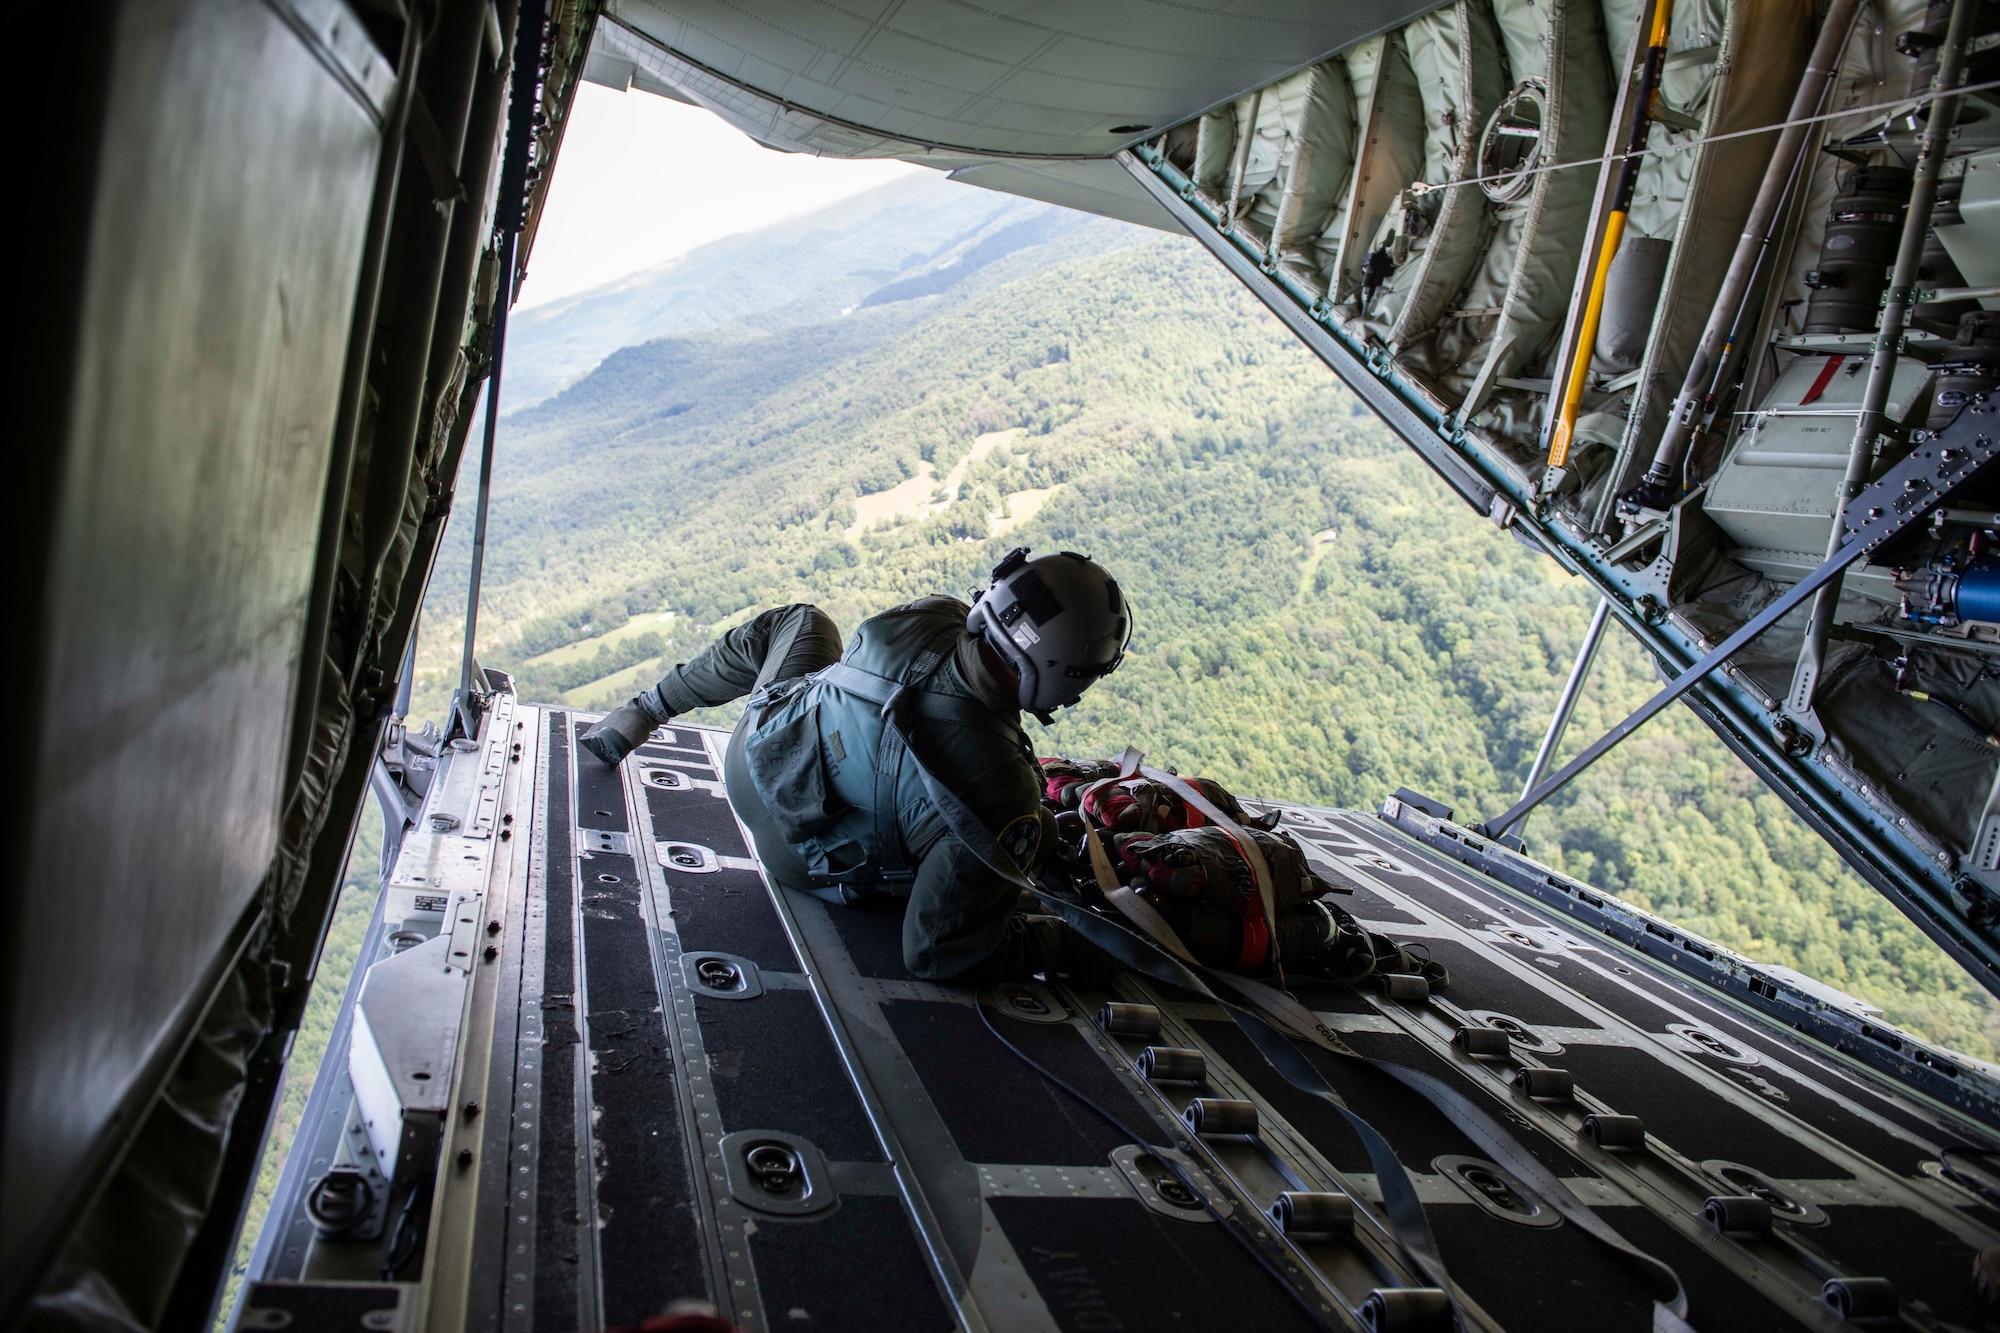 Air Force Reserve loadmaster prepares to launch cargo out of the ramp of a C-130J Super Hercules near Charleston, W. Va., Aug. 23, 2020. The training event tested aircrew on their tactical combat airlift capabilities such as cargo airdrop, formation flights, and personnel delivery in a contested environment. There were a total of eight aircraft from six units supporting the training effort, enabling strategic depth and readiness for the force. (U.S. Air Force Reserve photo by Senior Airman Nathan Byrnes)